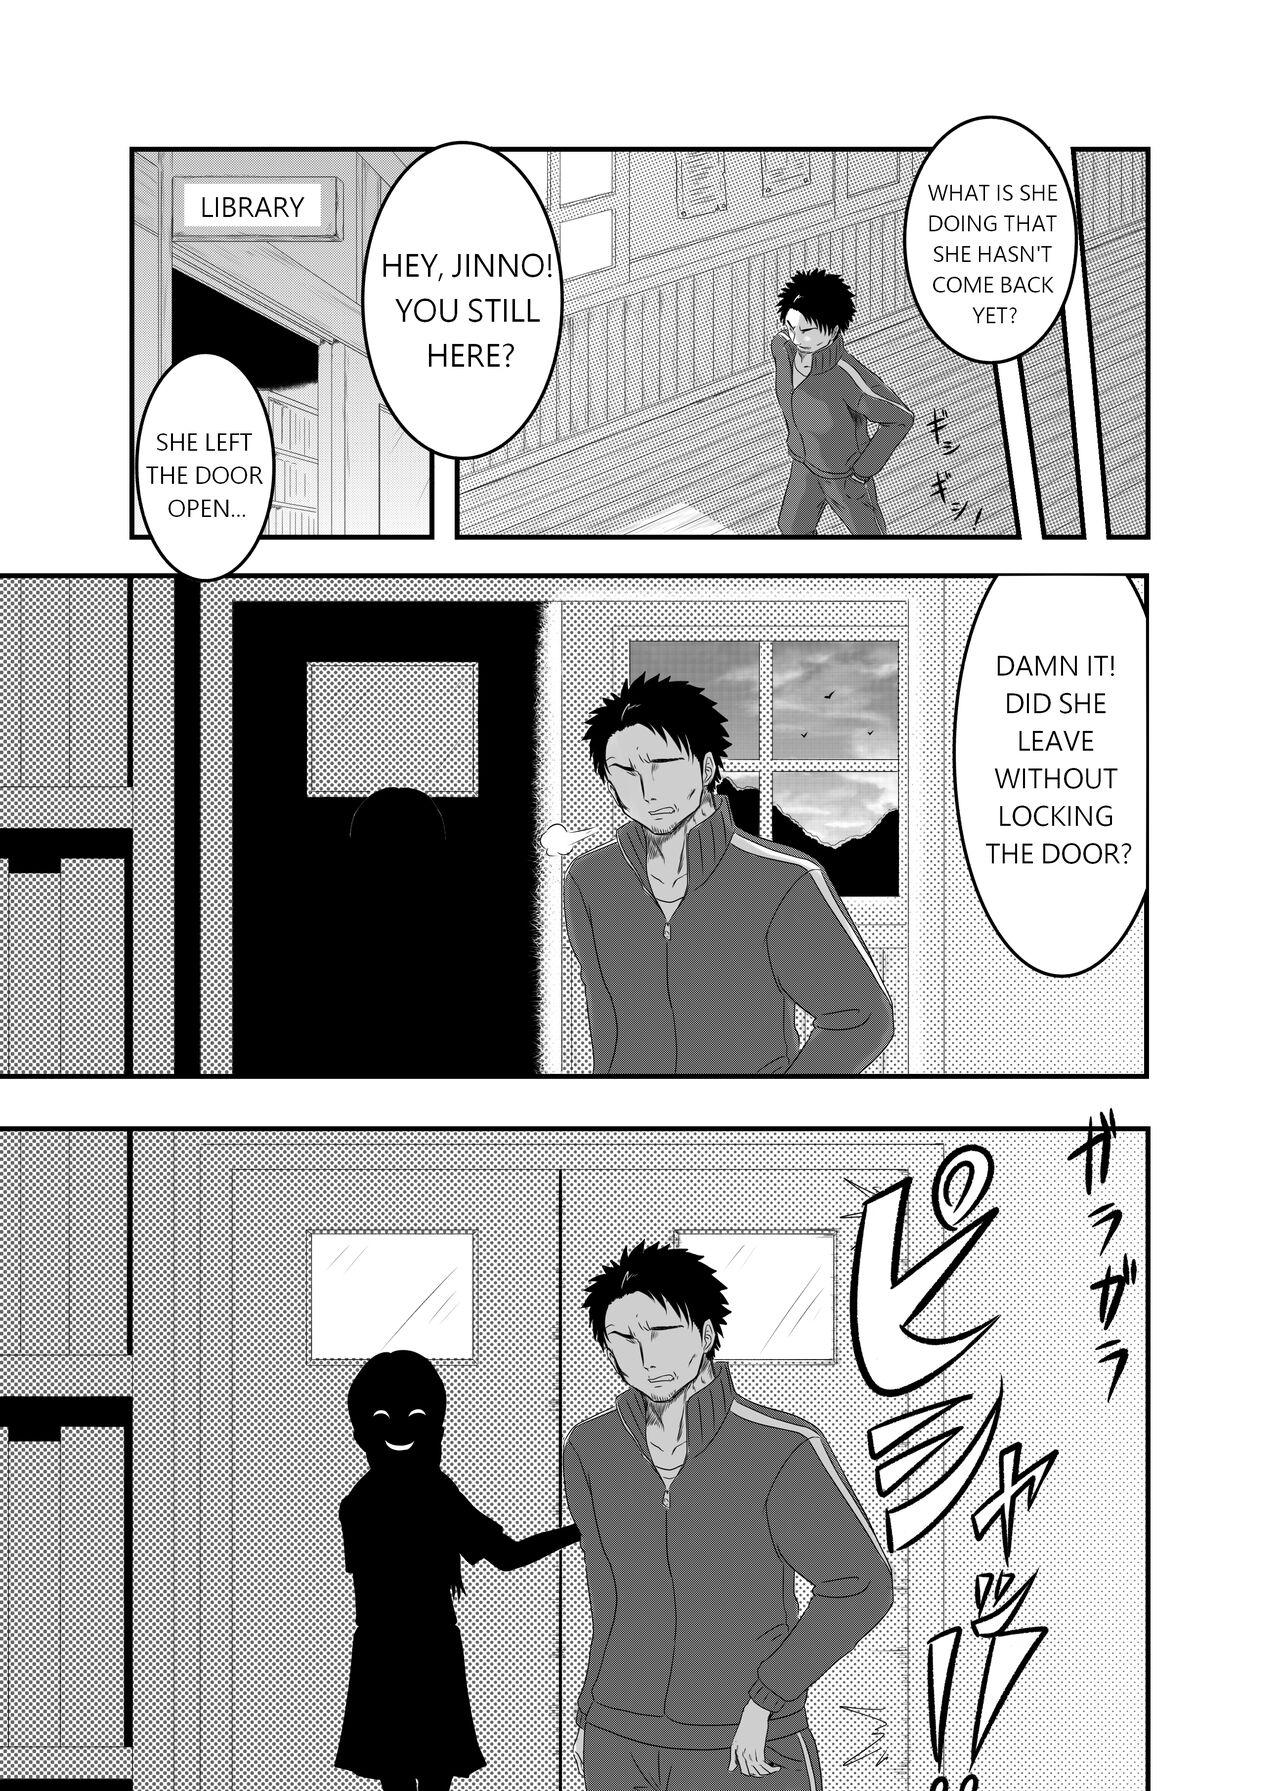 1080p The Evil Mask 1 - The mask 4some - Page 9